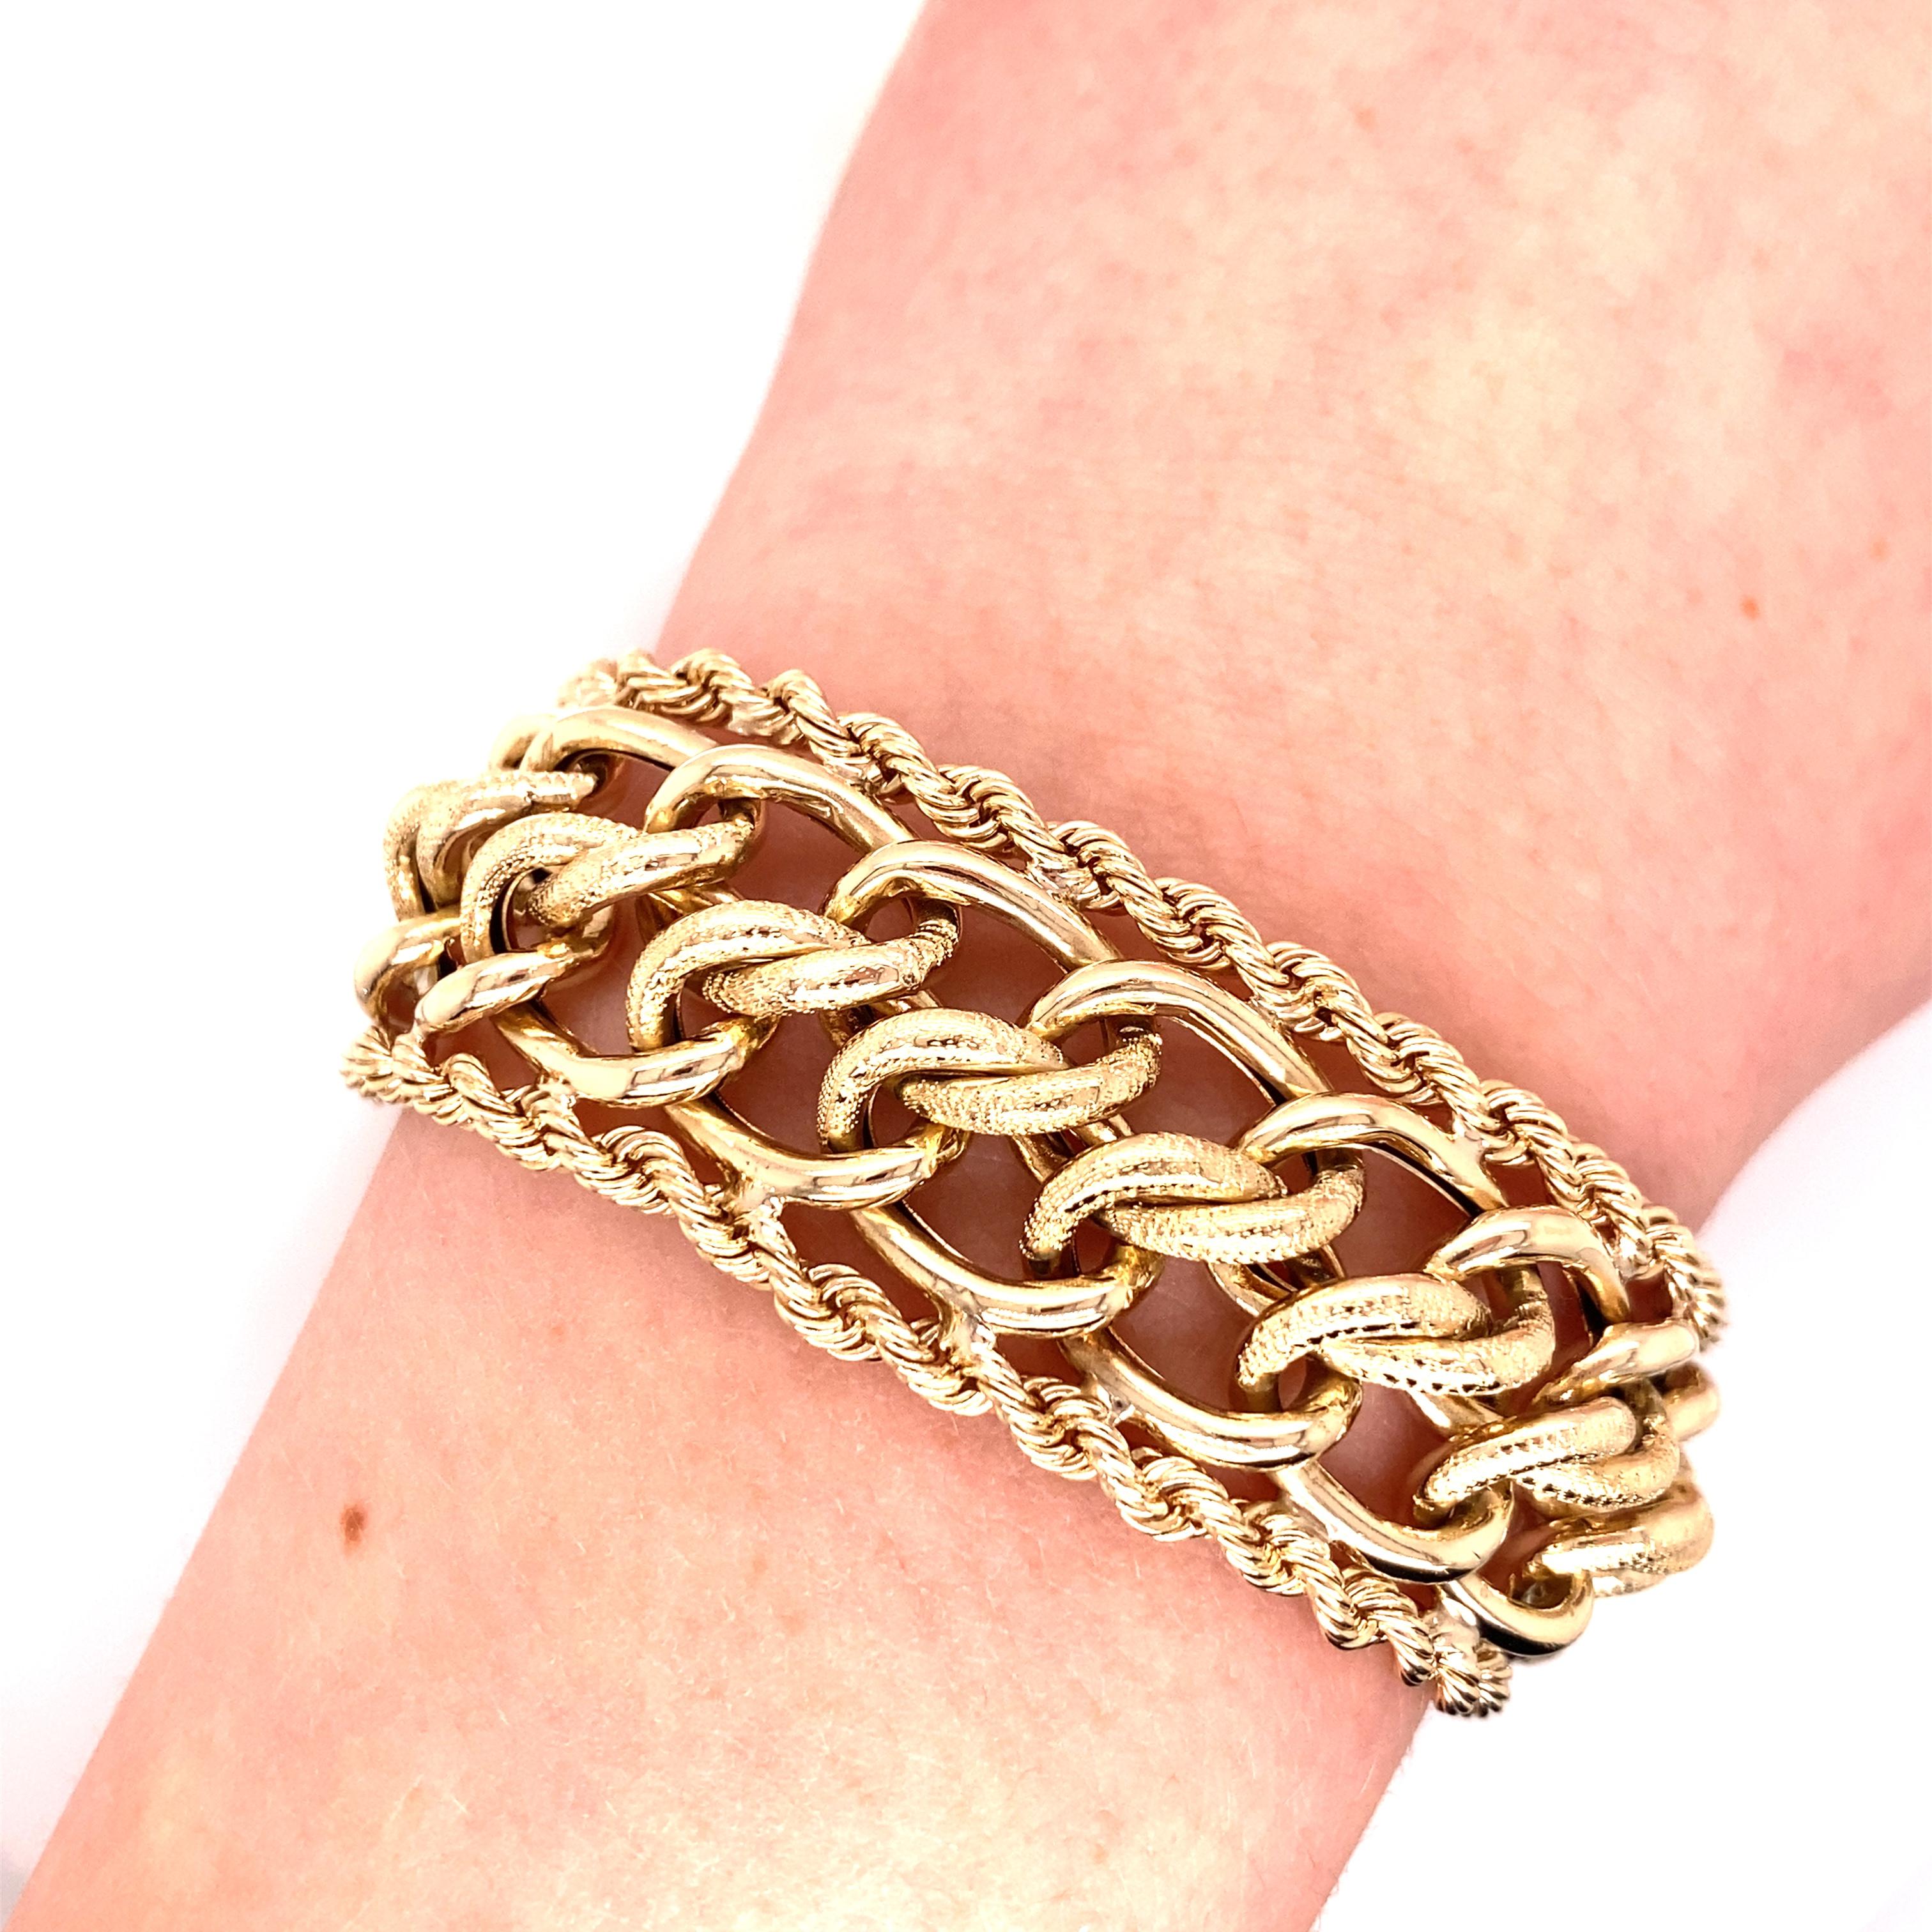 Vintage 1980's 14K Yellow Gold Wide Link With Rope Edge Bracelet - The bracelet measures .75 inches wide and 7.25 inches long. It has a hidden plunger clasp with a figure 8 safety catch. The bracelet weighs 50.72 grams.